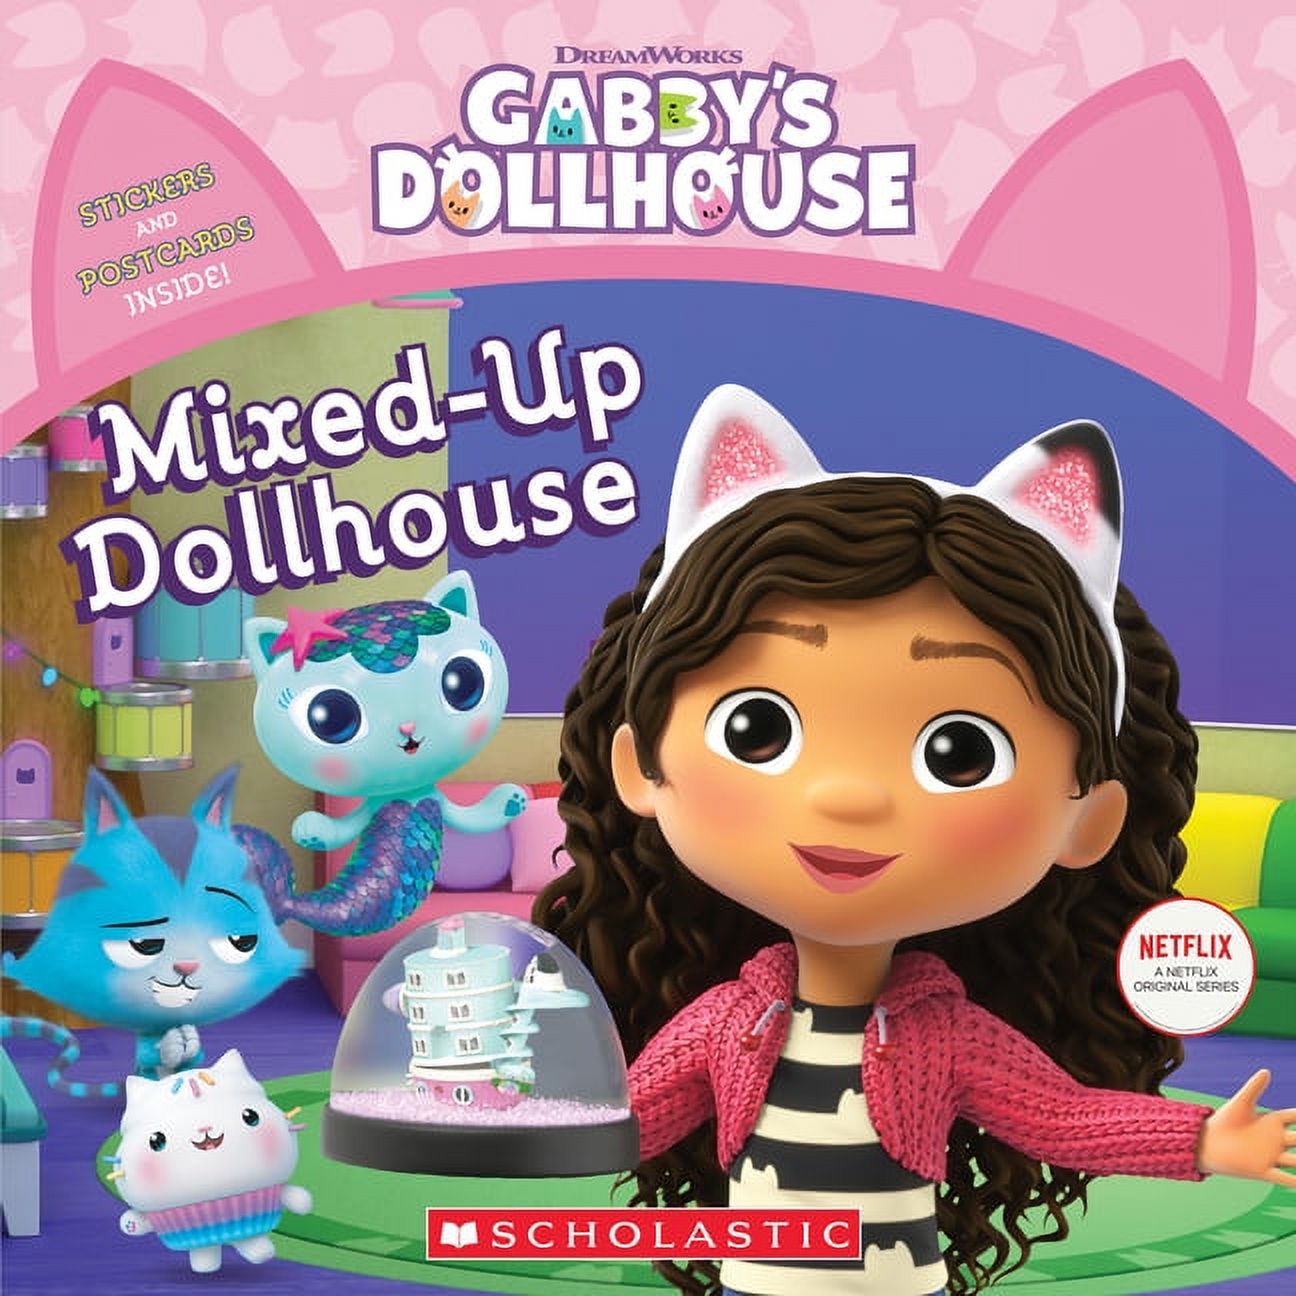 Mixed-Up Dollhouse (Gabby's Dollhouse Storybook) (Paperback) - image 1 of 1